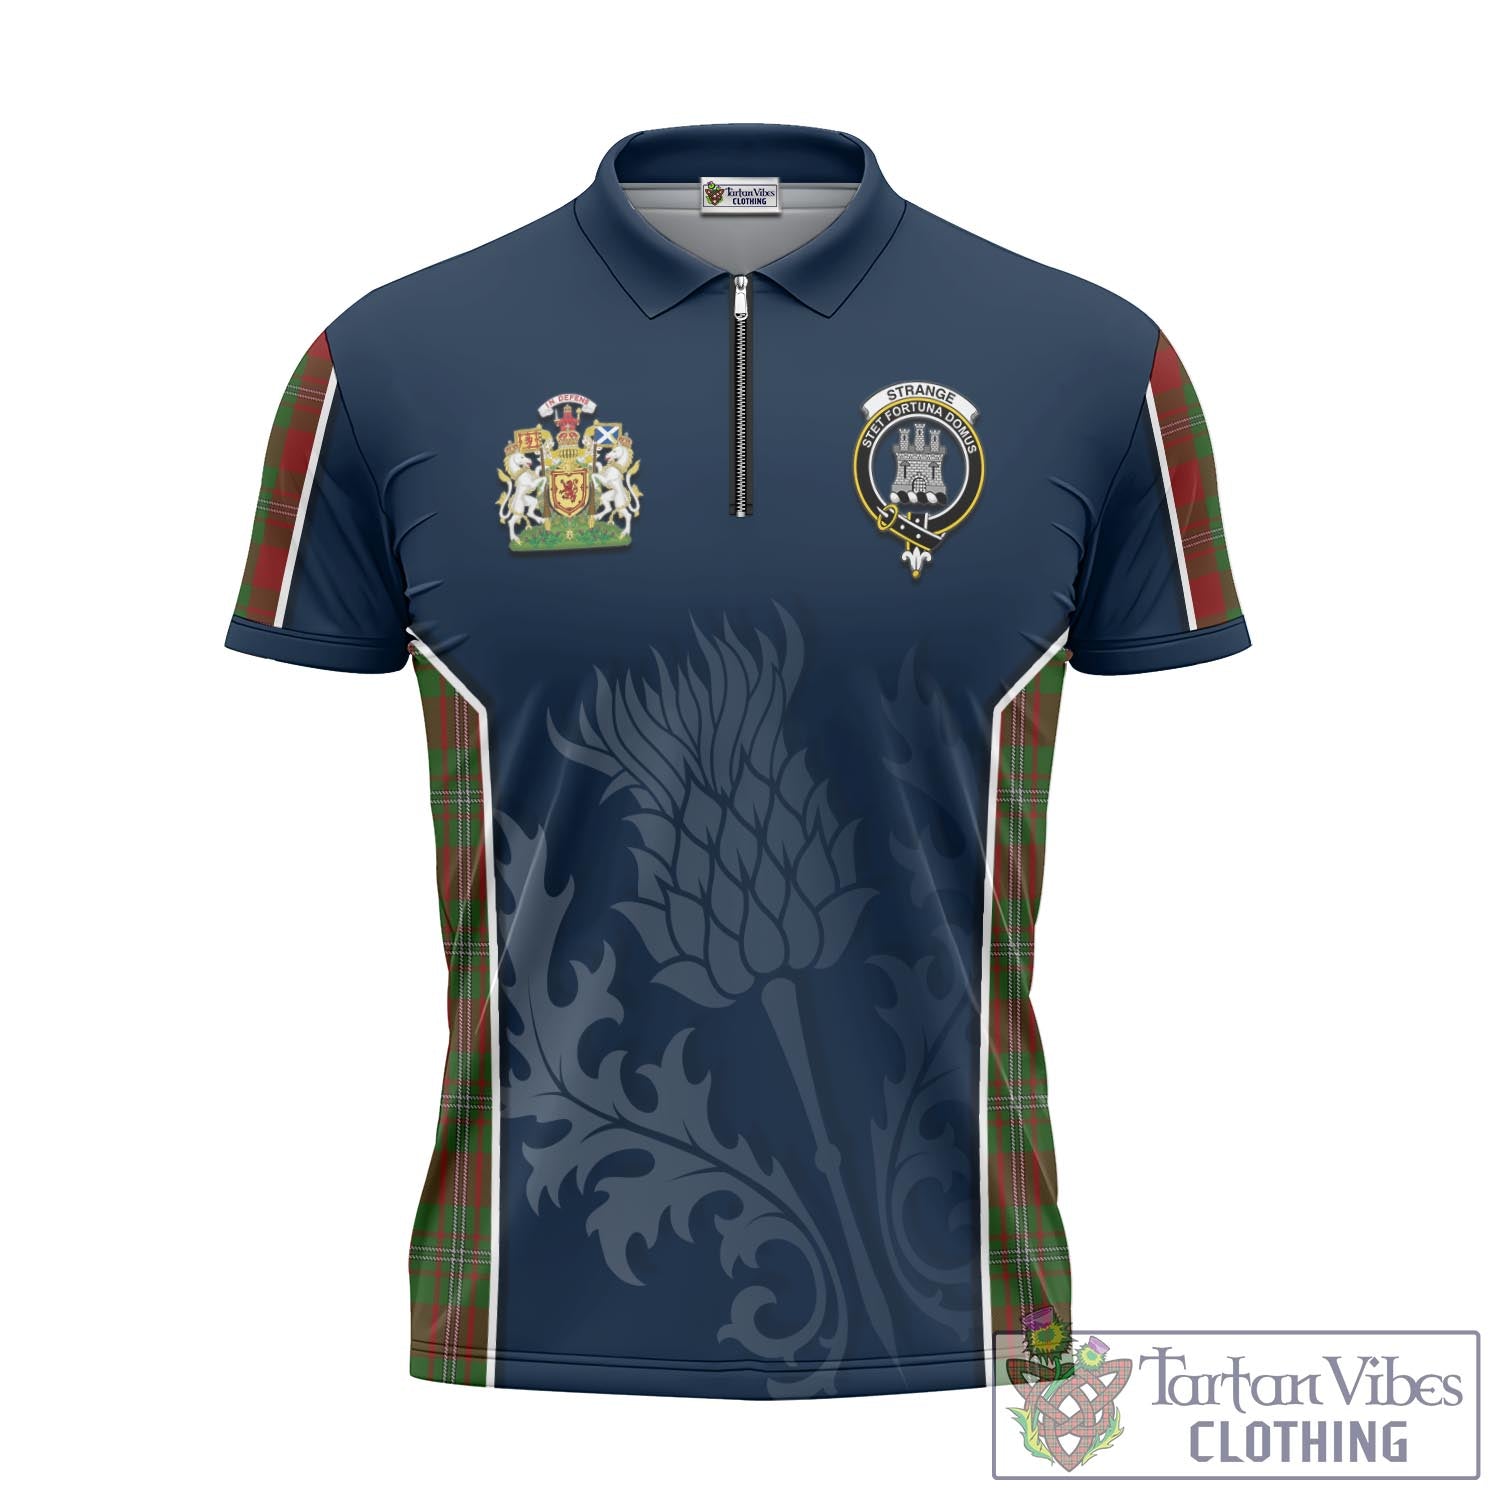 Tartan Vibes Clothing Strange Tartan Zipper Polo Shirt with Family Crest and Scottish Thistle Vibes Sport Style